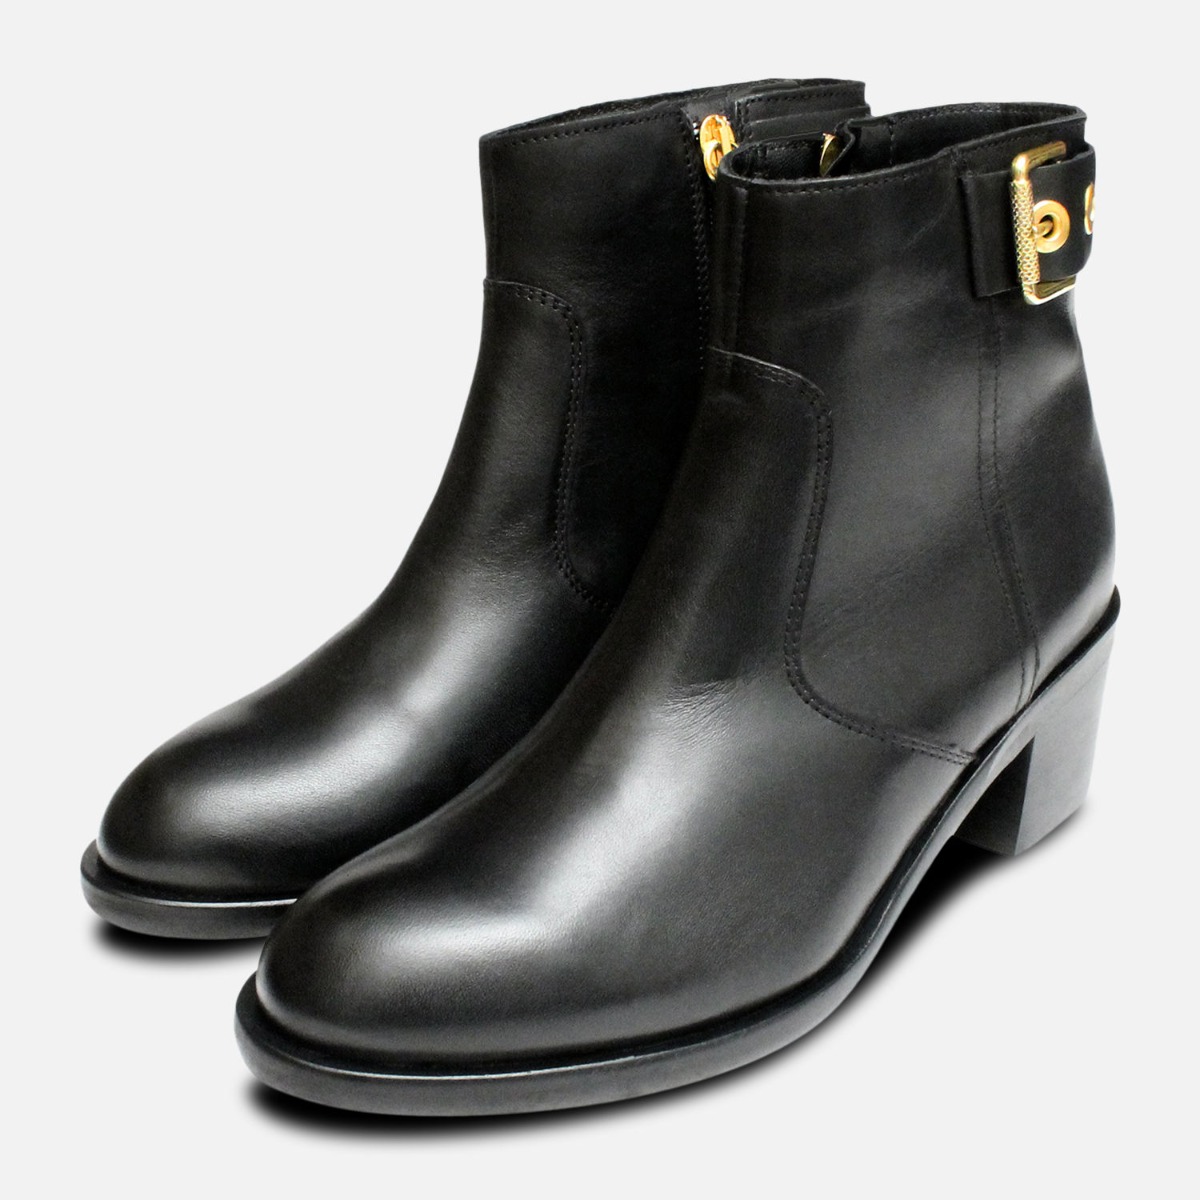 Gold Buckle Tommy Hilfiger Parson Boots 